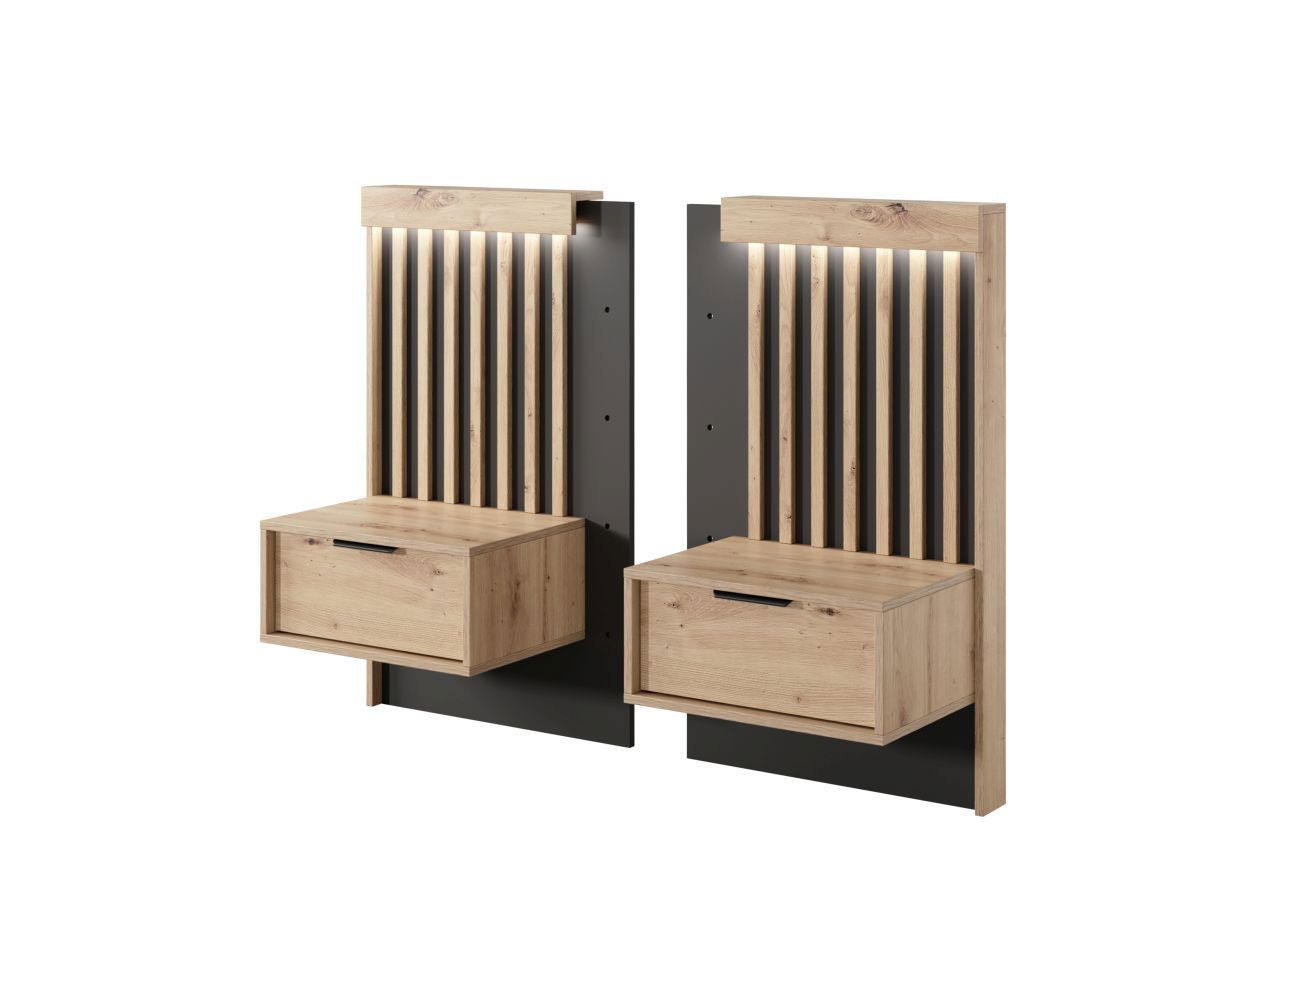 Two bedside cabinets with two drawers Chebba 04, color: Artisan oak / anthracite - Dimensions: 104 x 50 x 39.5 cm (H x W x D)